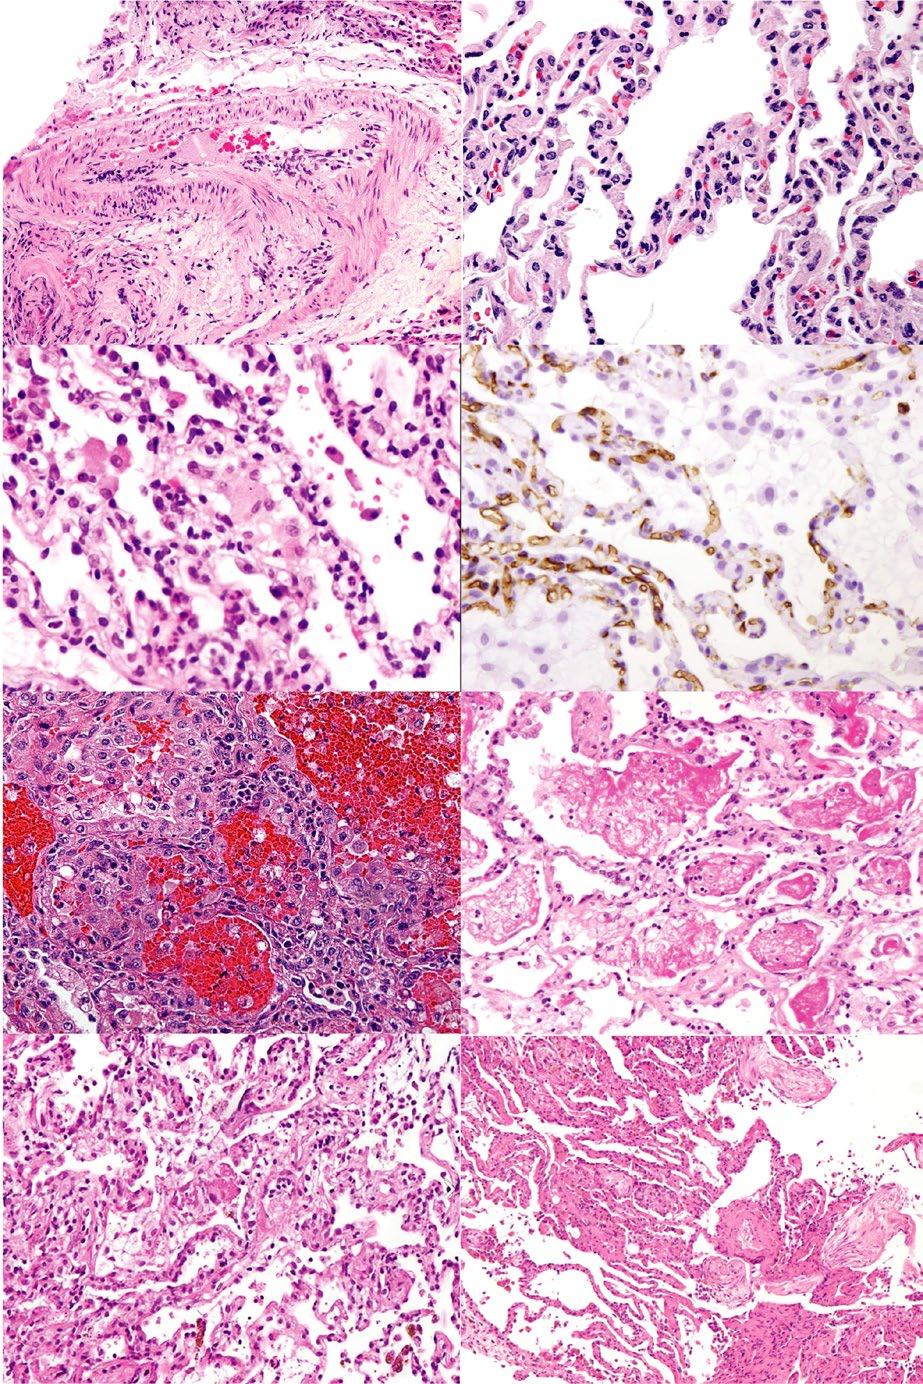 ROUX et al. 5 A B C D E F G H FIGURE 1 Panel of histologic features evocative of AMR. (A) Arteritis in a patient with definite AMR.